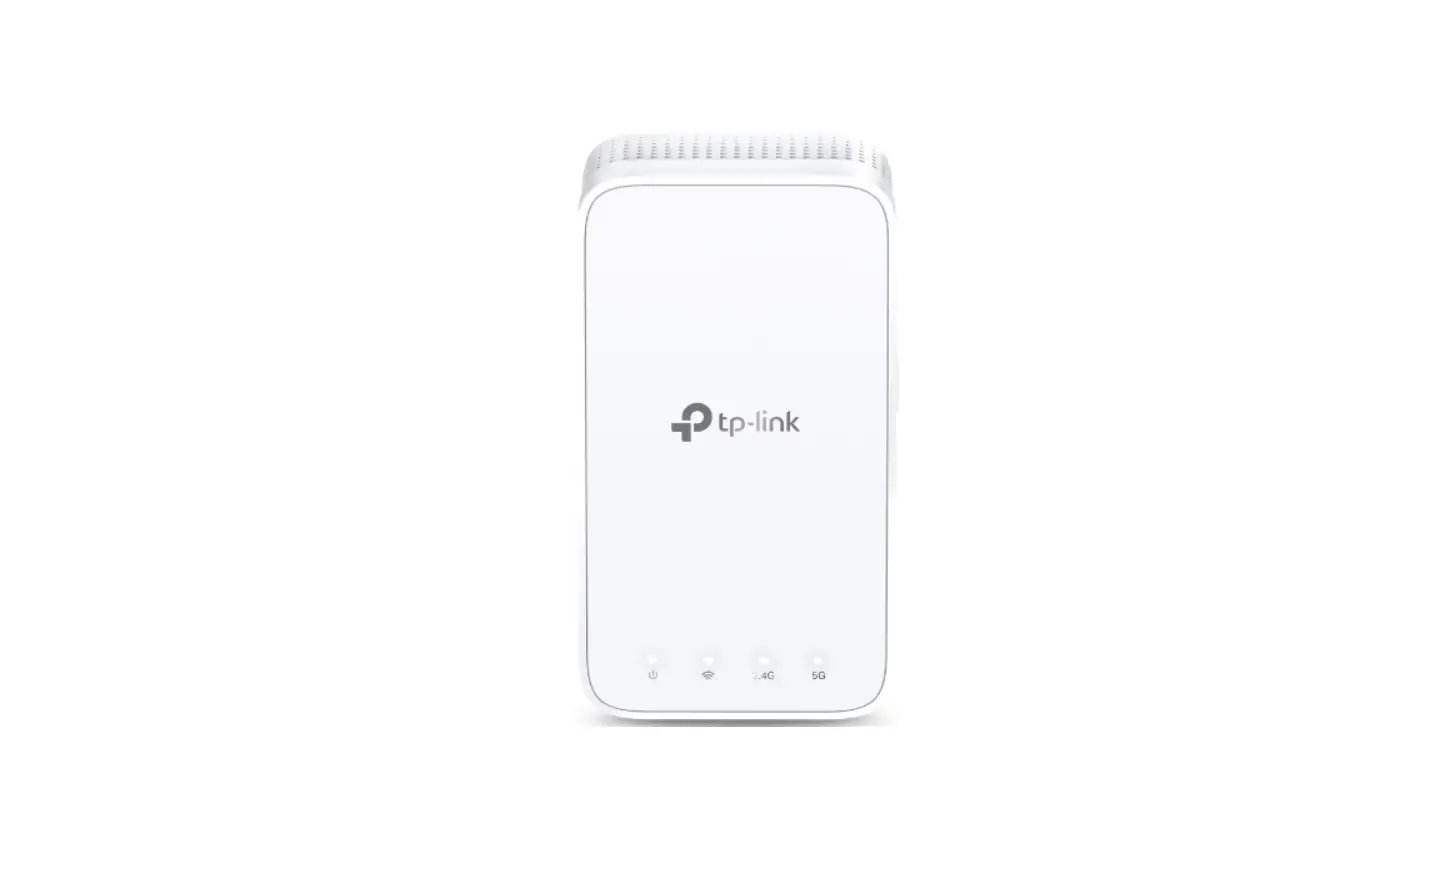 Deco M3W AC1200 Whole Home Mesh Wi-Fi Extender